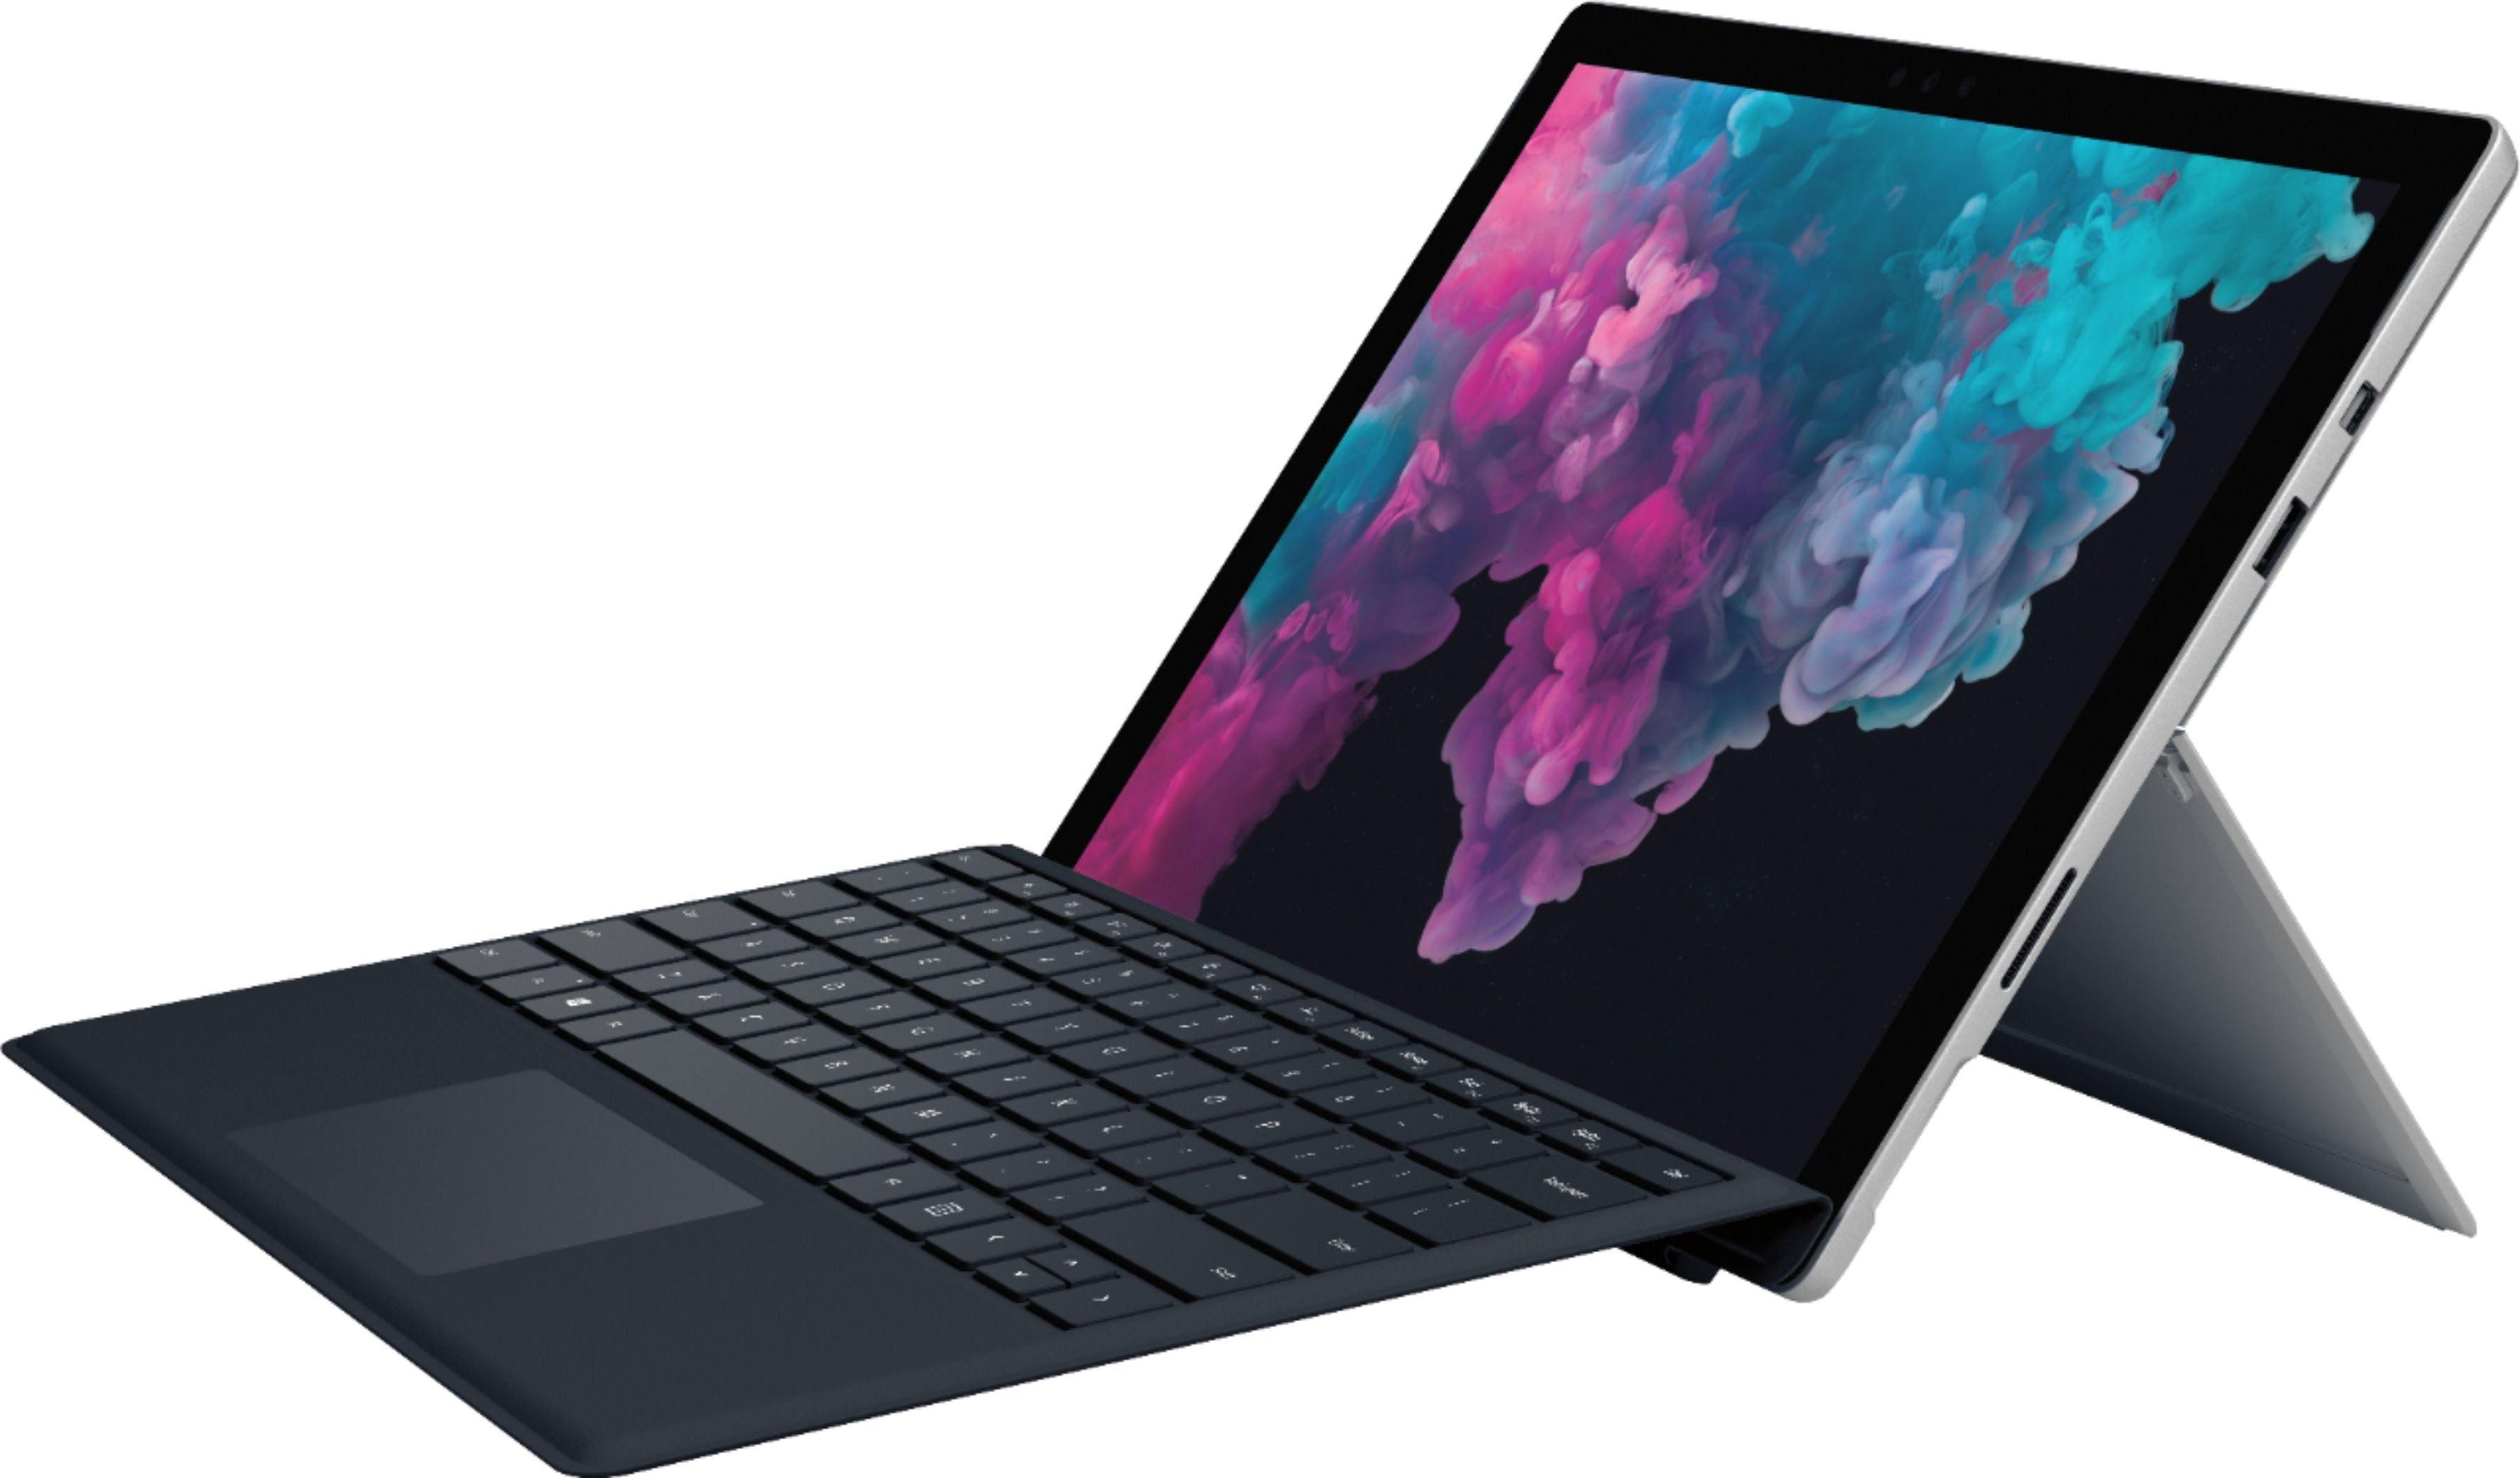 Microsoft - Geek Squad Certified Refurbished Surface Pro 6 with Black Keyboard - 12.3" Touch Screen - Core i5 - 8GB - 128GB SSD - Platinum | BBSS32A